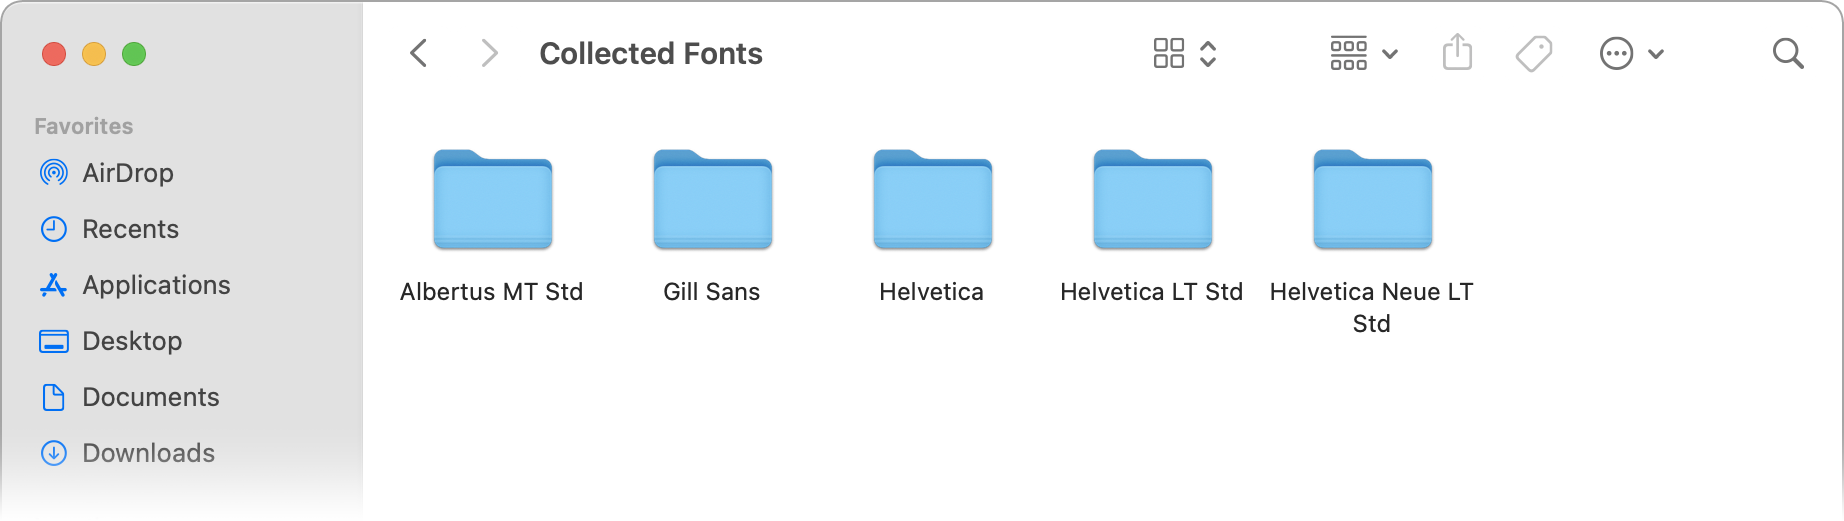 A folder of collected fonts in macOS